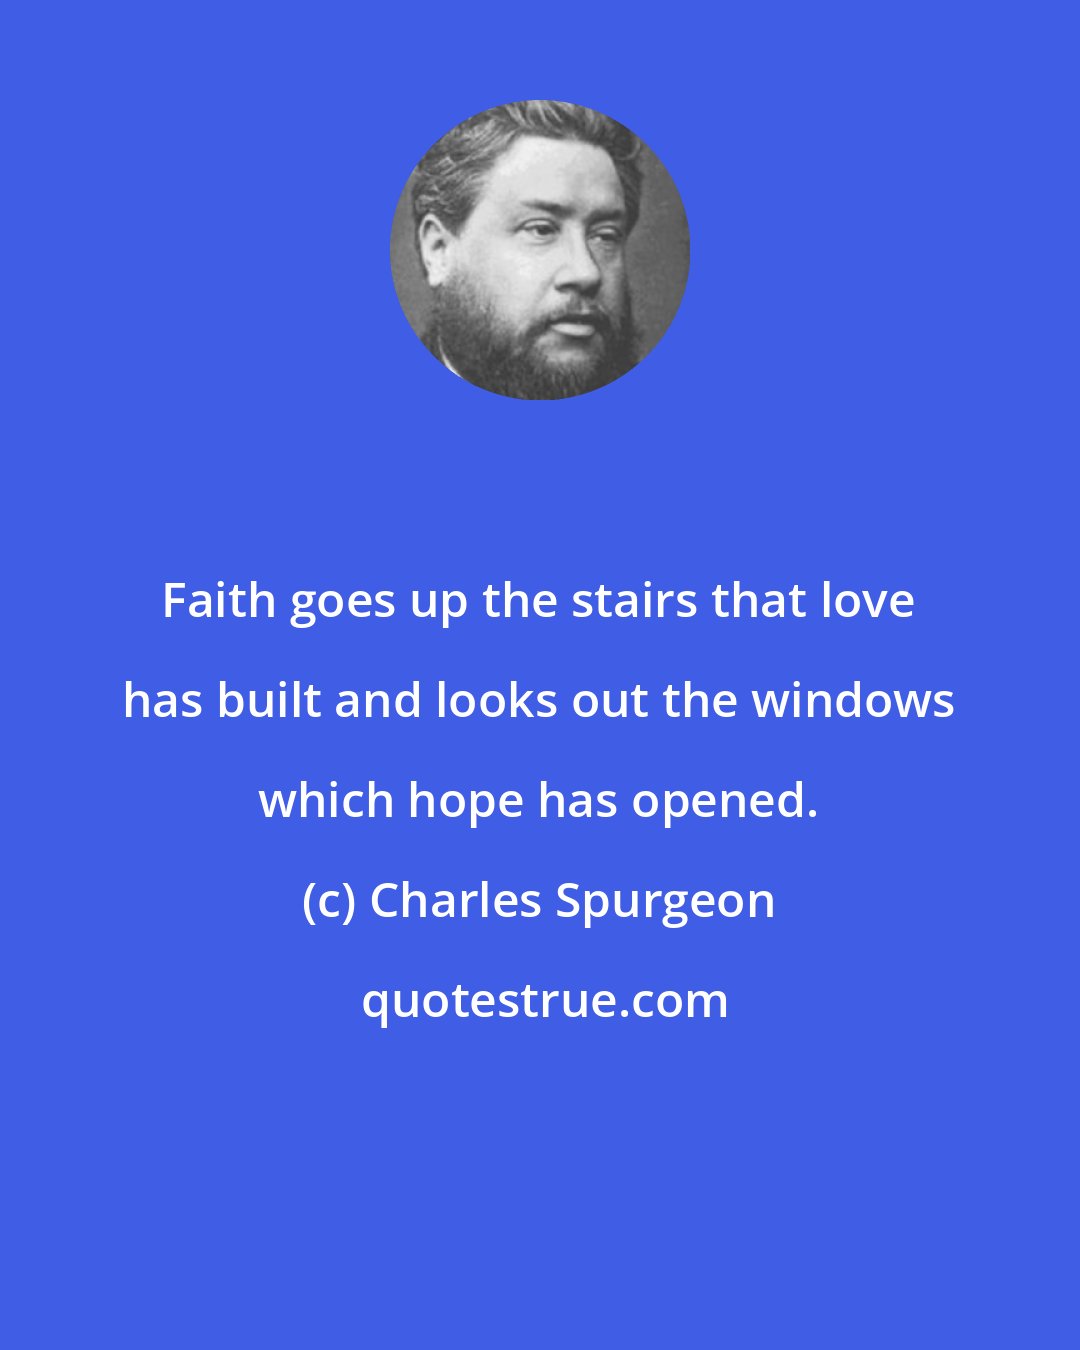 Charles Spurgeon: Faith goes up the stairs that love has built and looks out the windows which hope has opened.